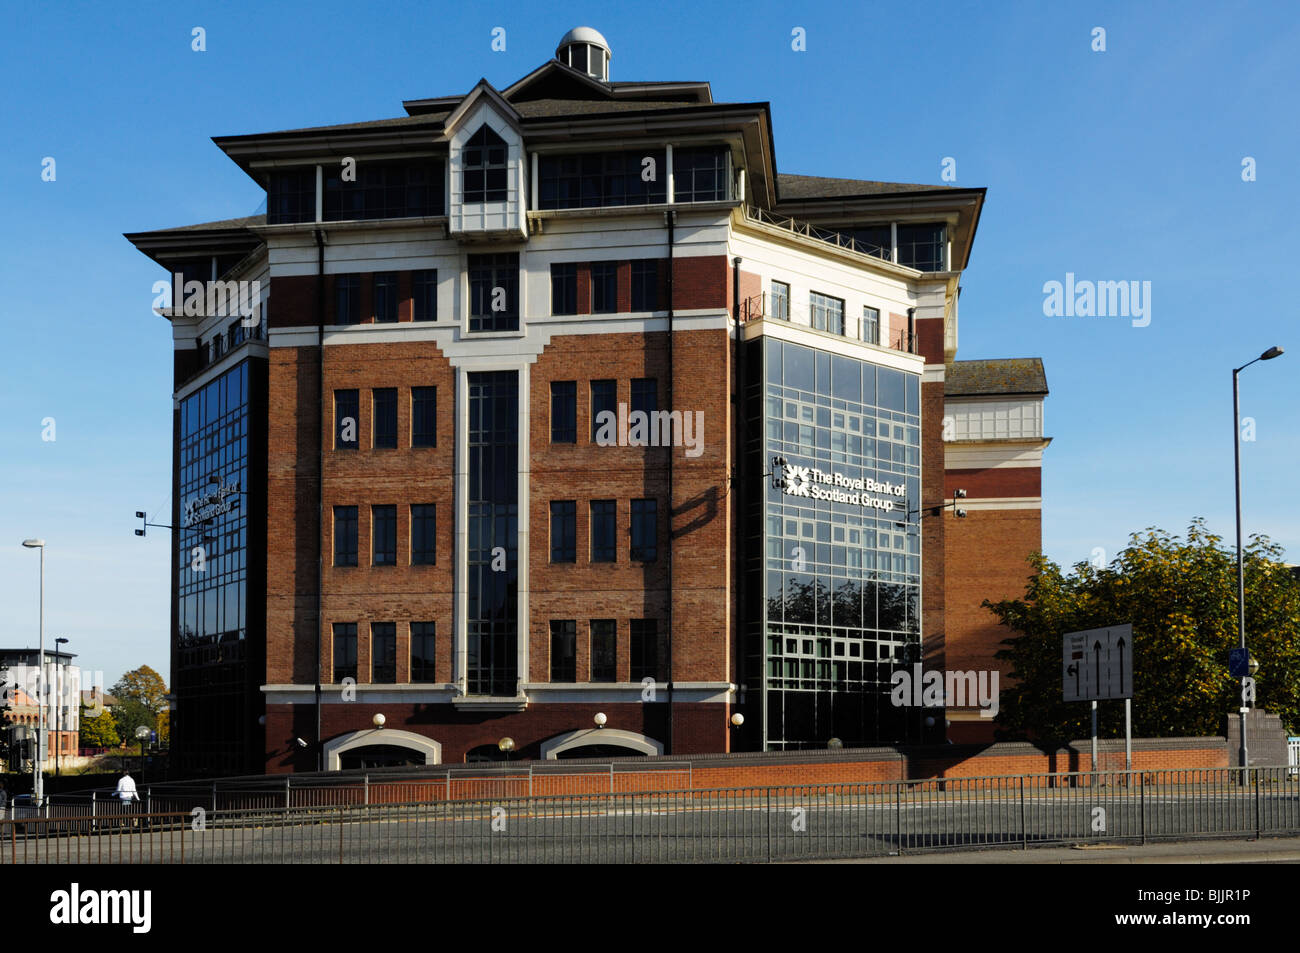 The Royal Bank of Scotland Group office in Avon Street viewed from Temple Way, Bristol, England. Stock Photo